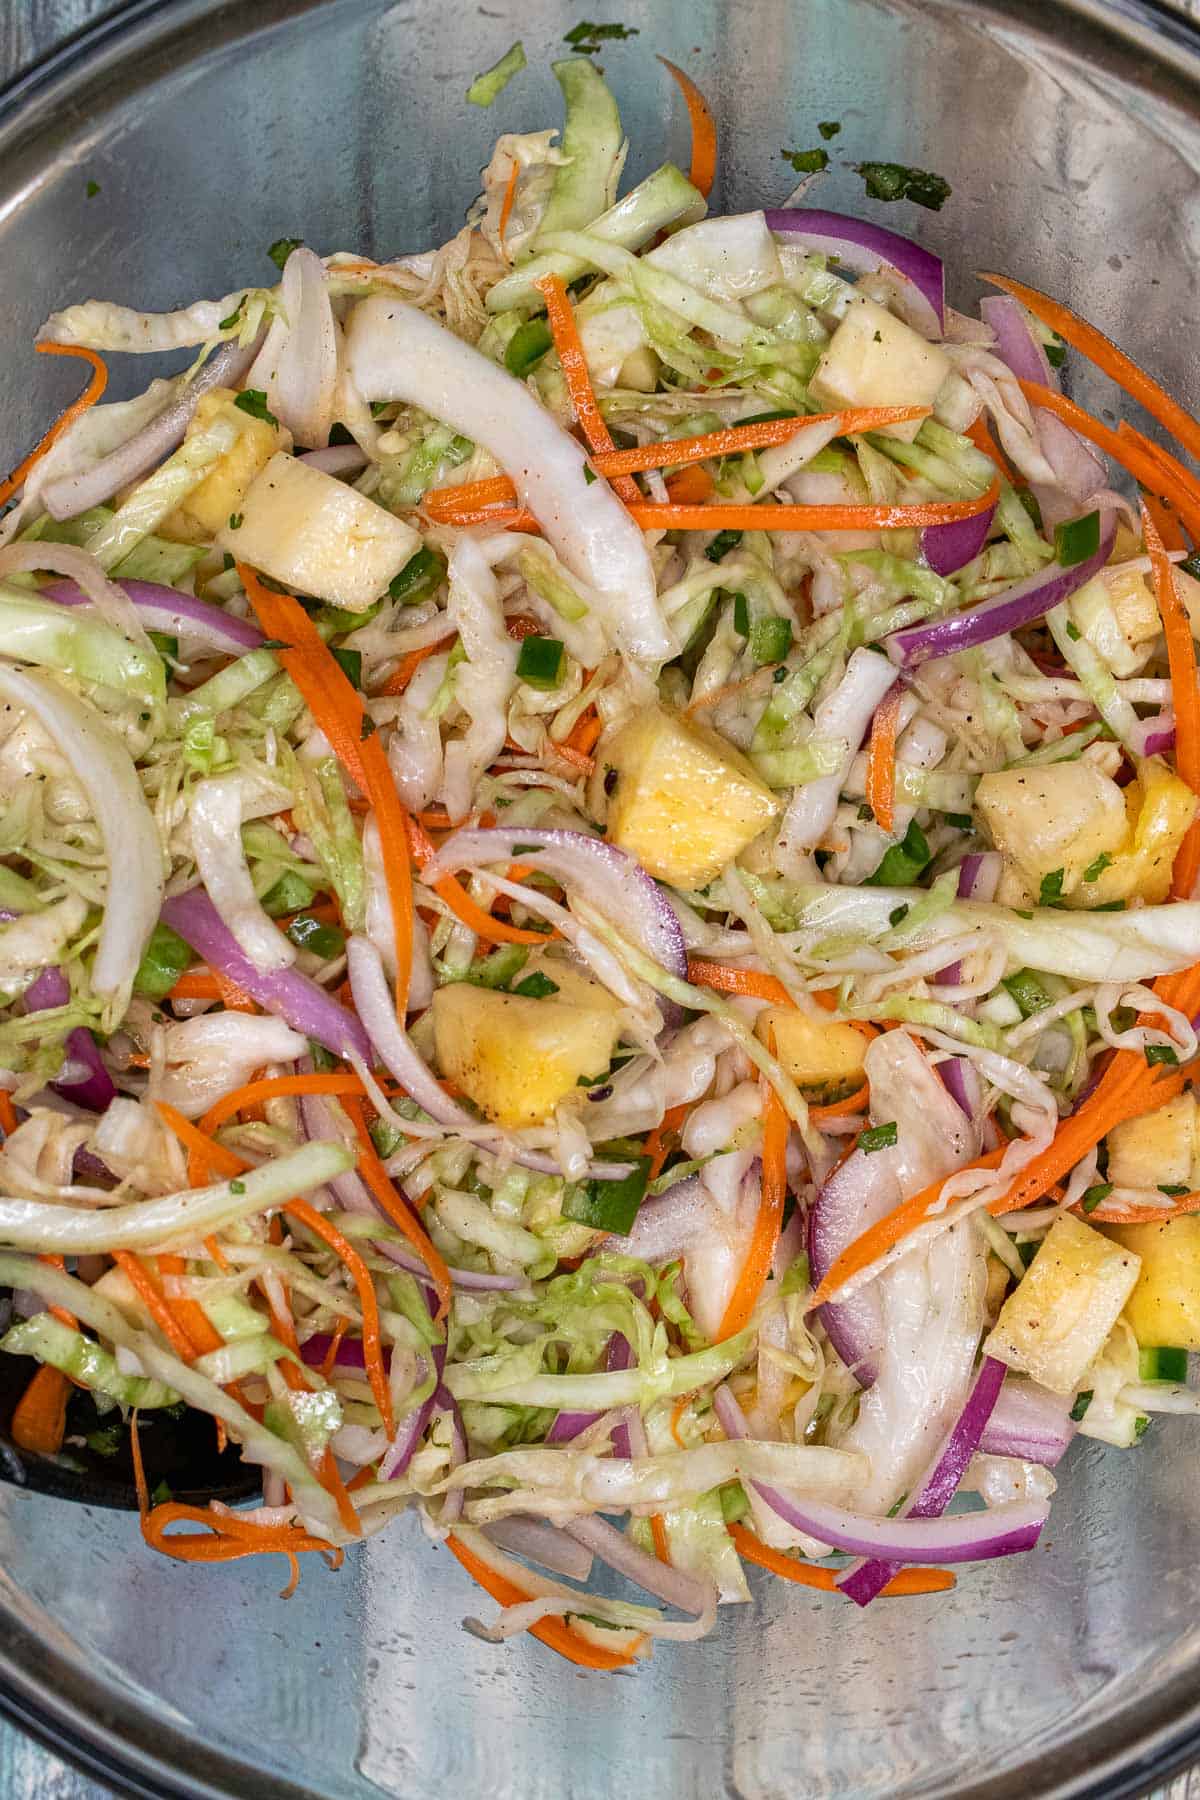 Pineapple slaw tossed with lime and mint dressing in a glass mixing bowl.